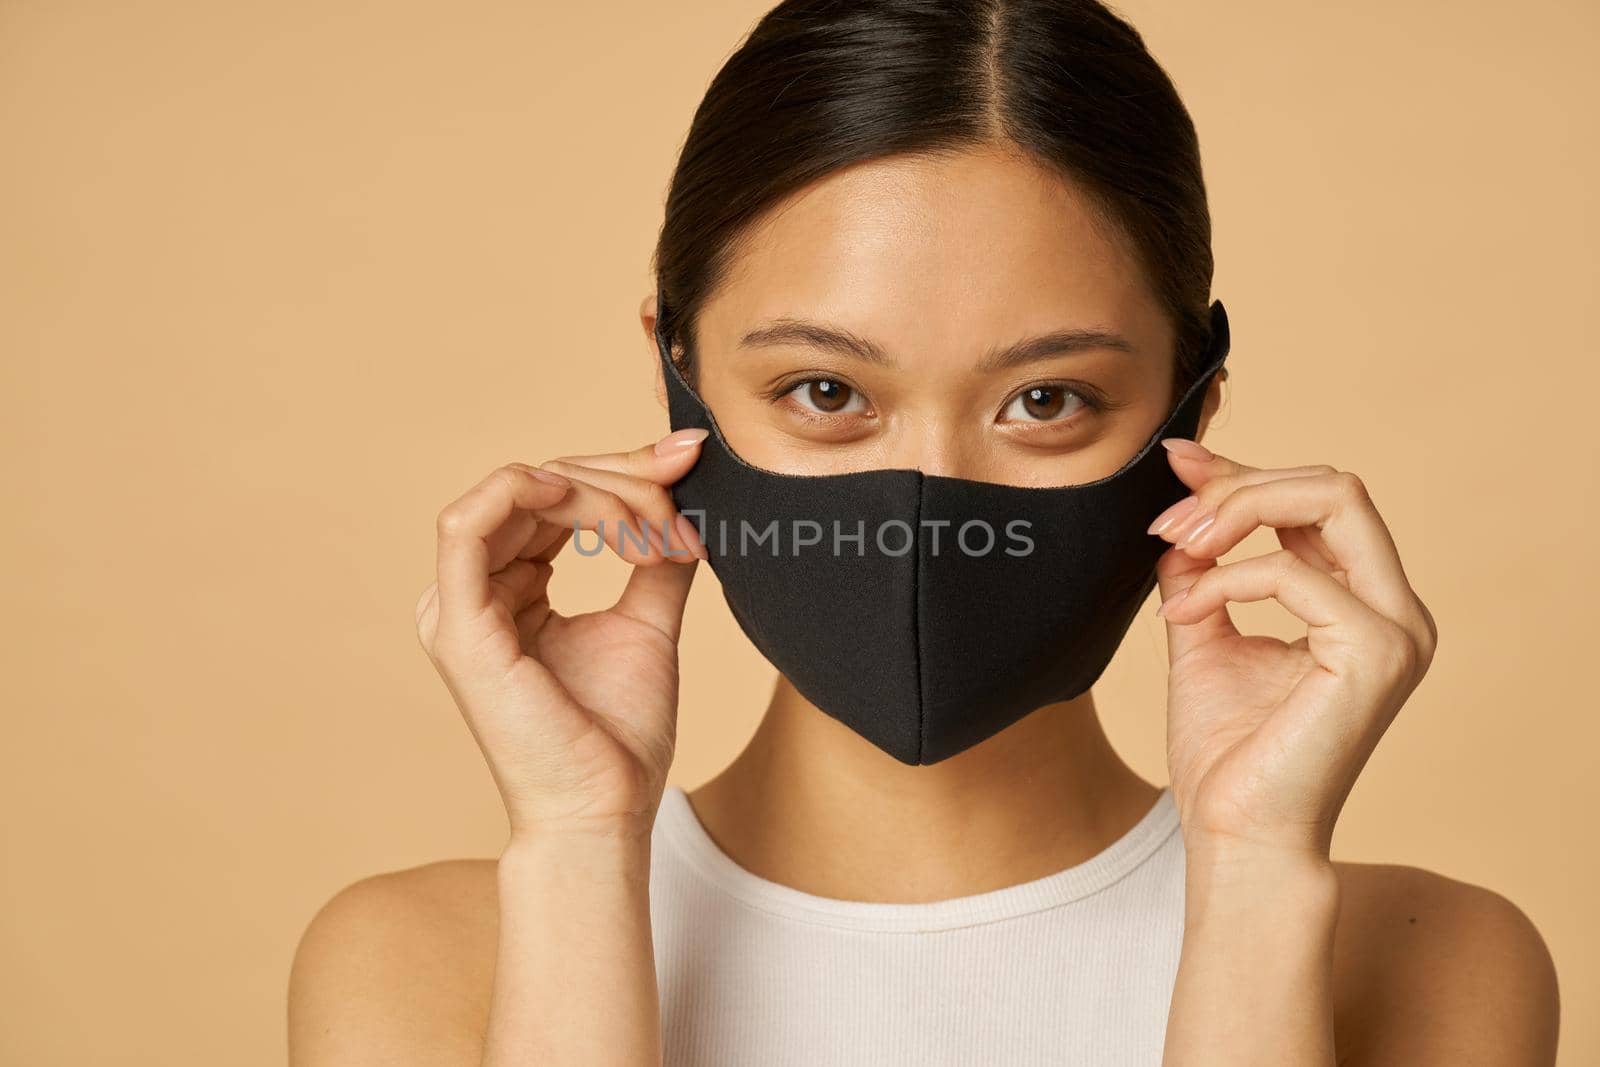 Charming young woman adjusting black facial mask and looking at camera, posing isolated over beige background. Safety, pandemic concept